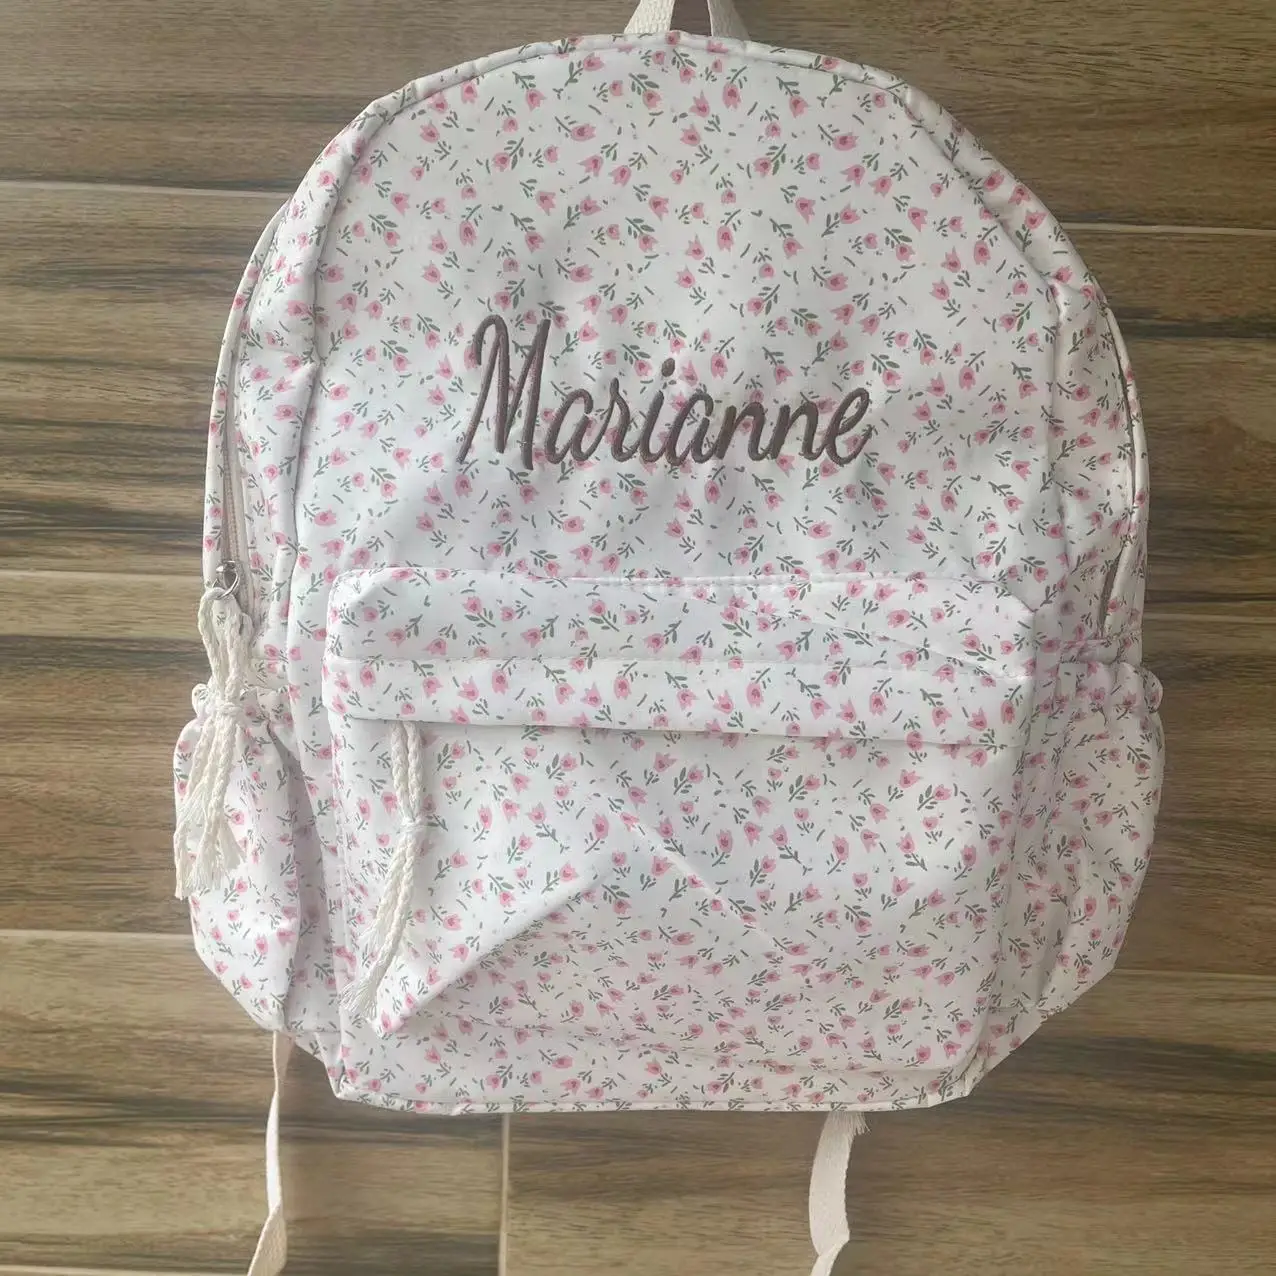 

Customized New Schoolbag Women's Floral Leisure Backpack Personalized Name Girl's Flower Backpack Unique Gifts Bag for Ladies